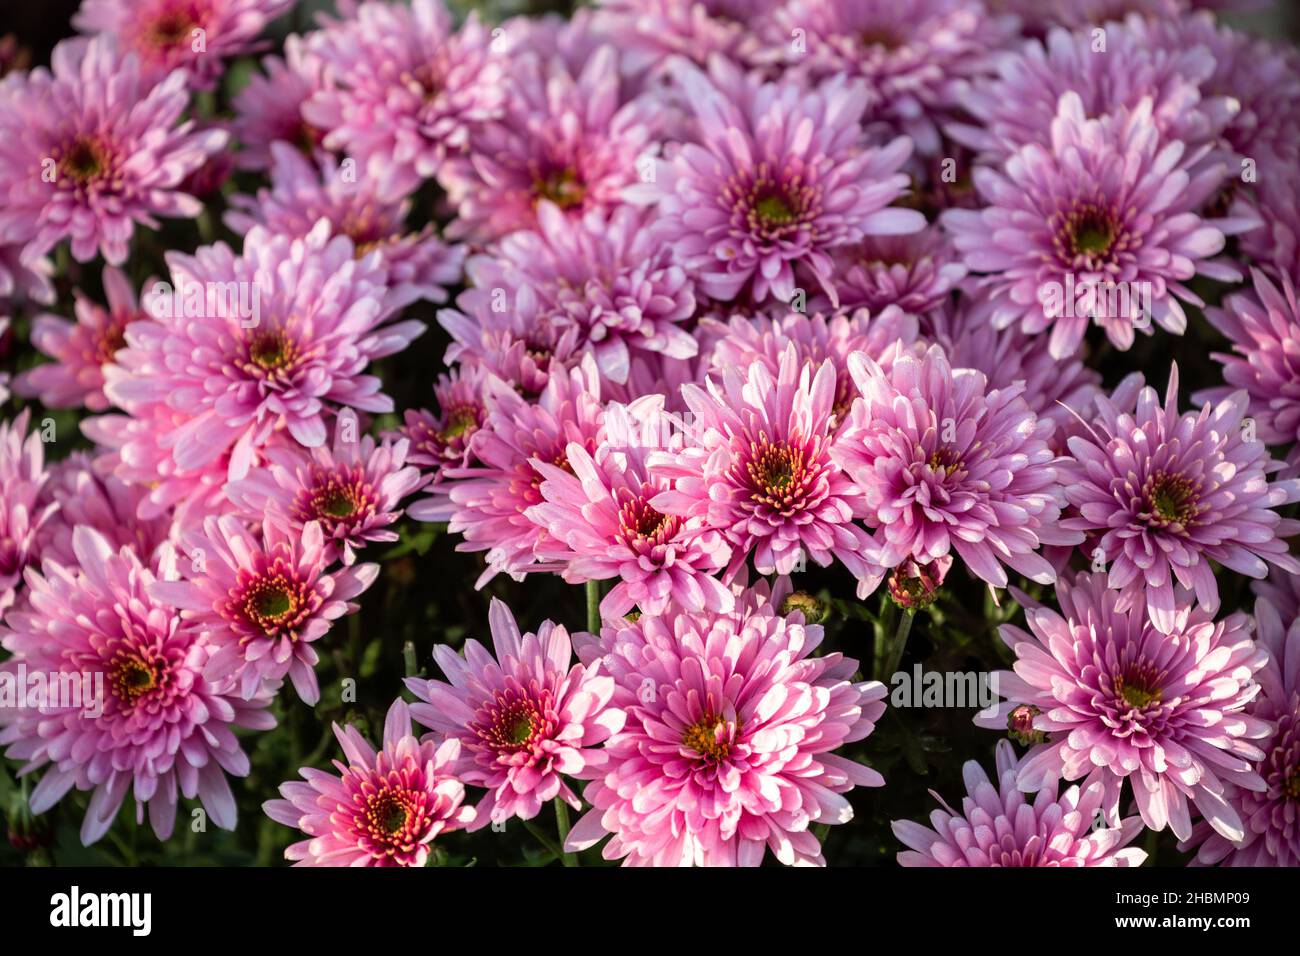 Natural floral background. Beautiful delicate pink-lilac chrysanthemums close-up. Autumn chrysanthemum flowers in dew drops Stock Photo